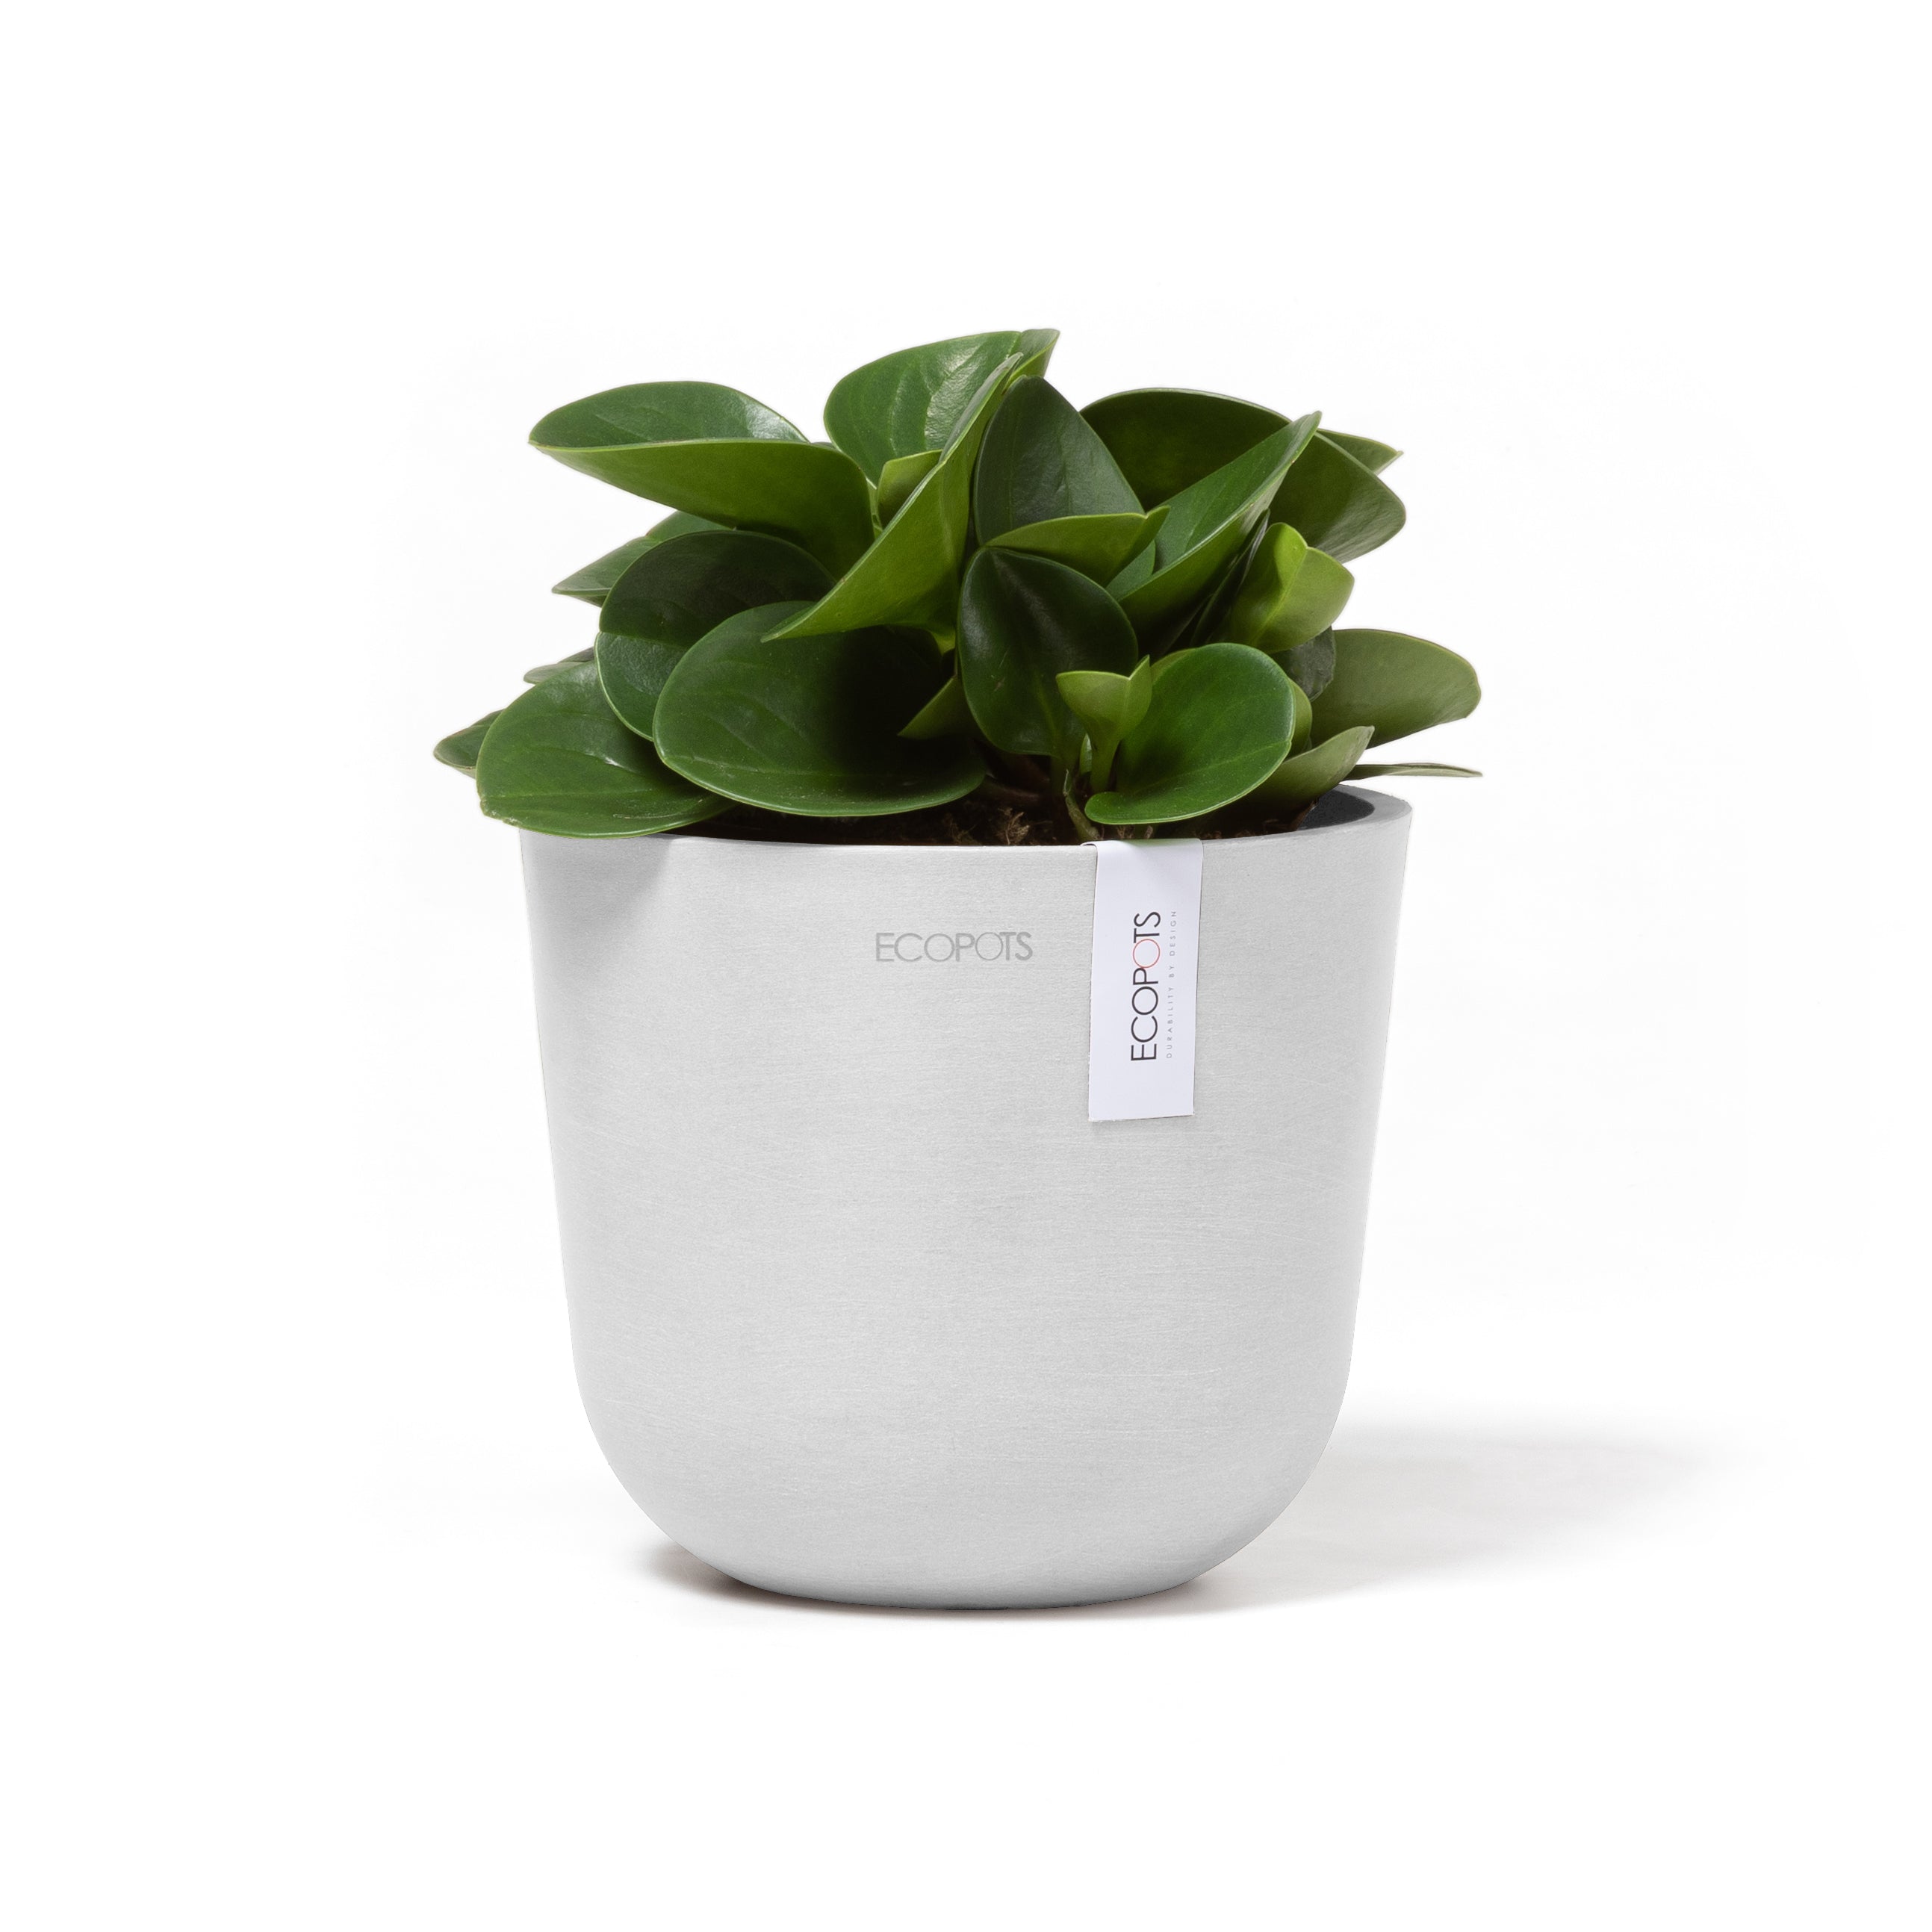 Oslo Eco Pot in White featured with a Baby Rubber Plant